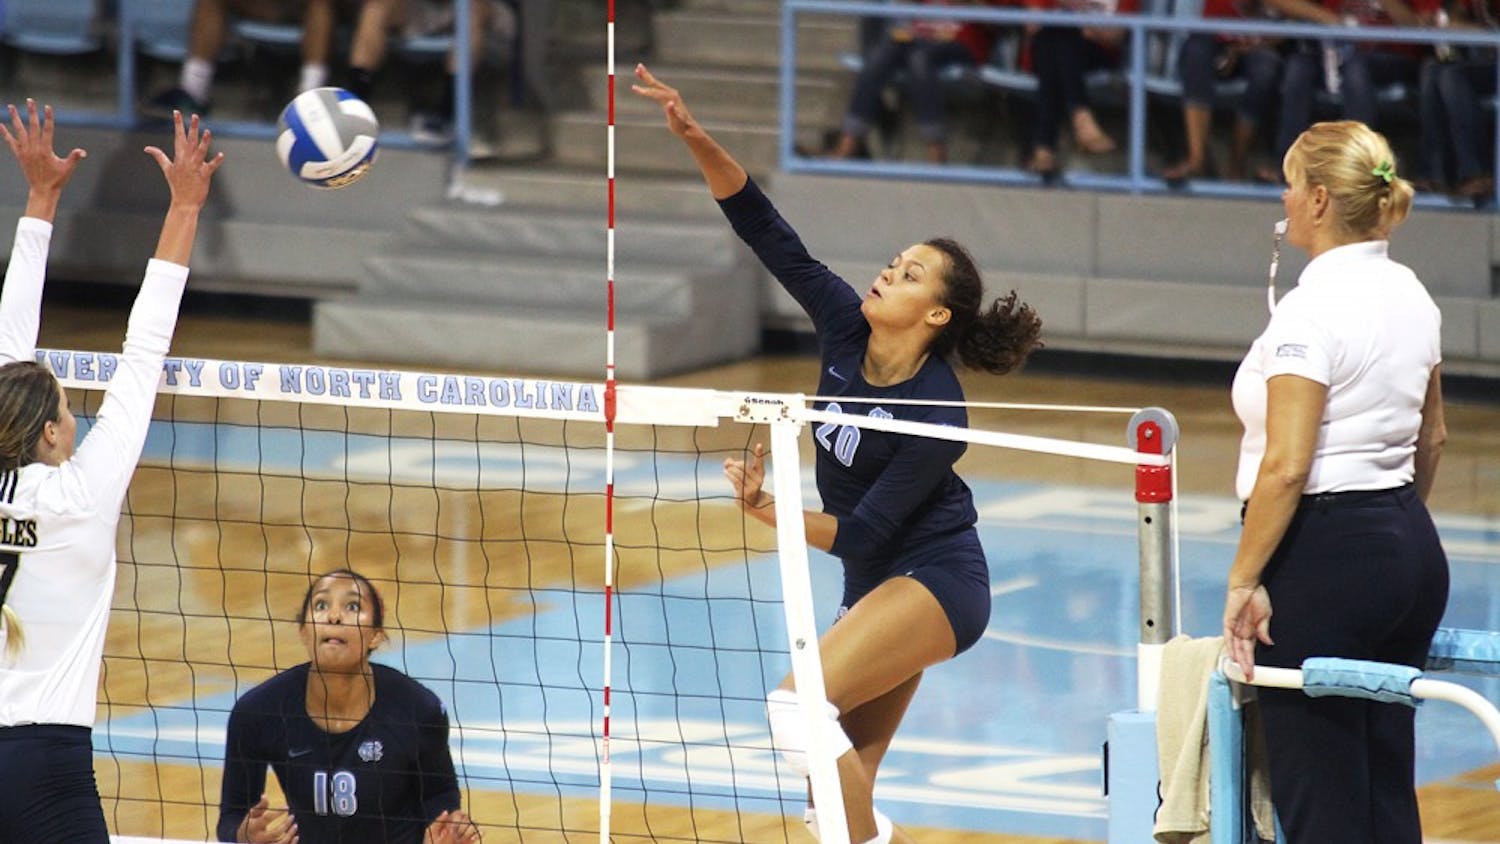 UNC redshirt sophomore Taylor Treacy (20) accounted for 21 kills in the Carolina Classic tournament this past weekend and went on to receive All-Tournament Team honors.